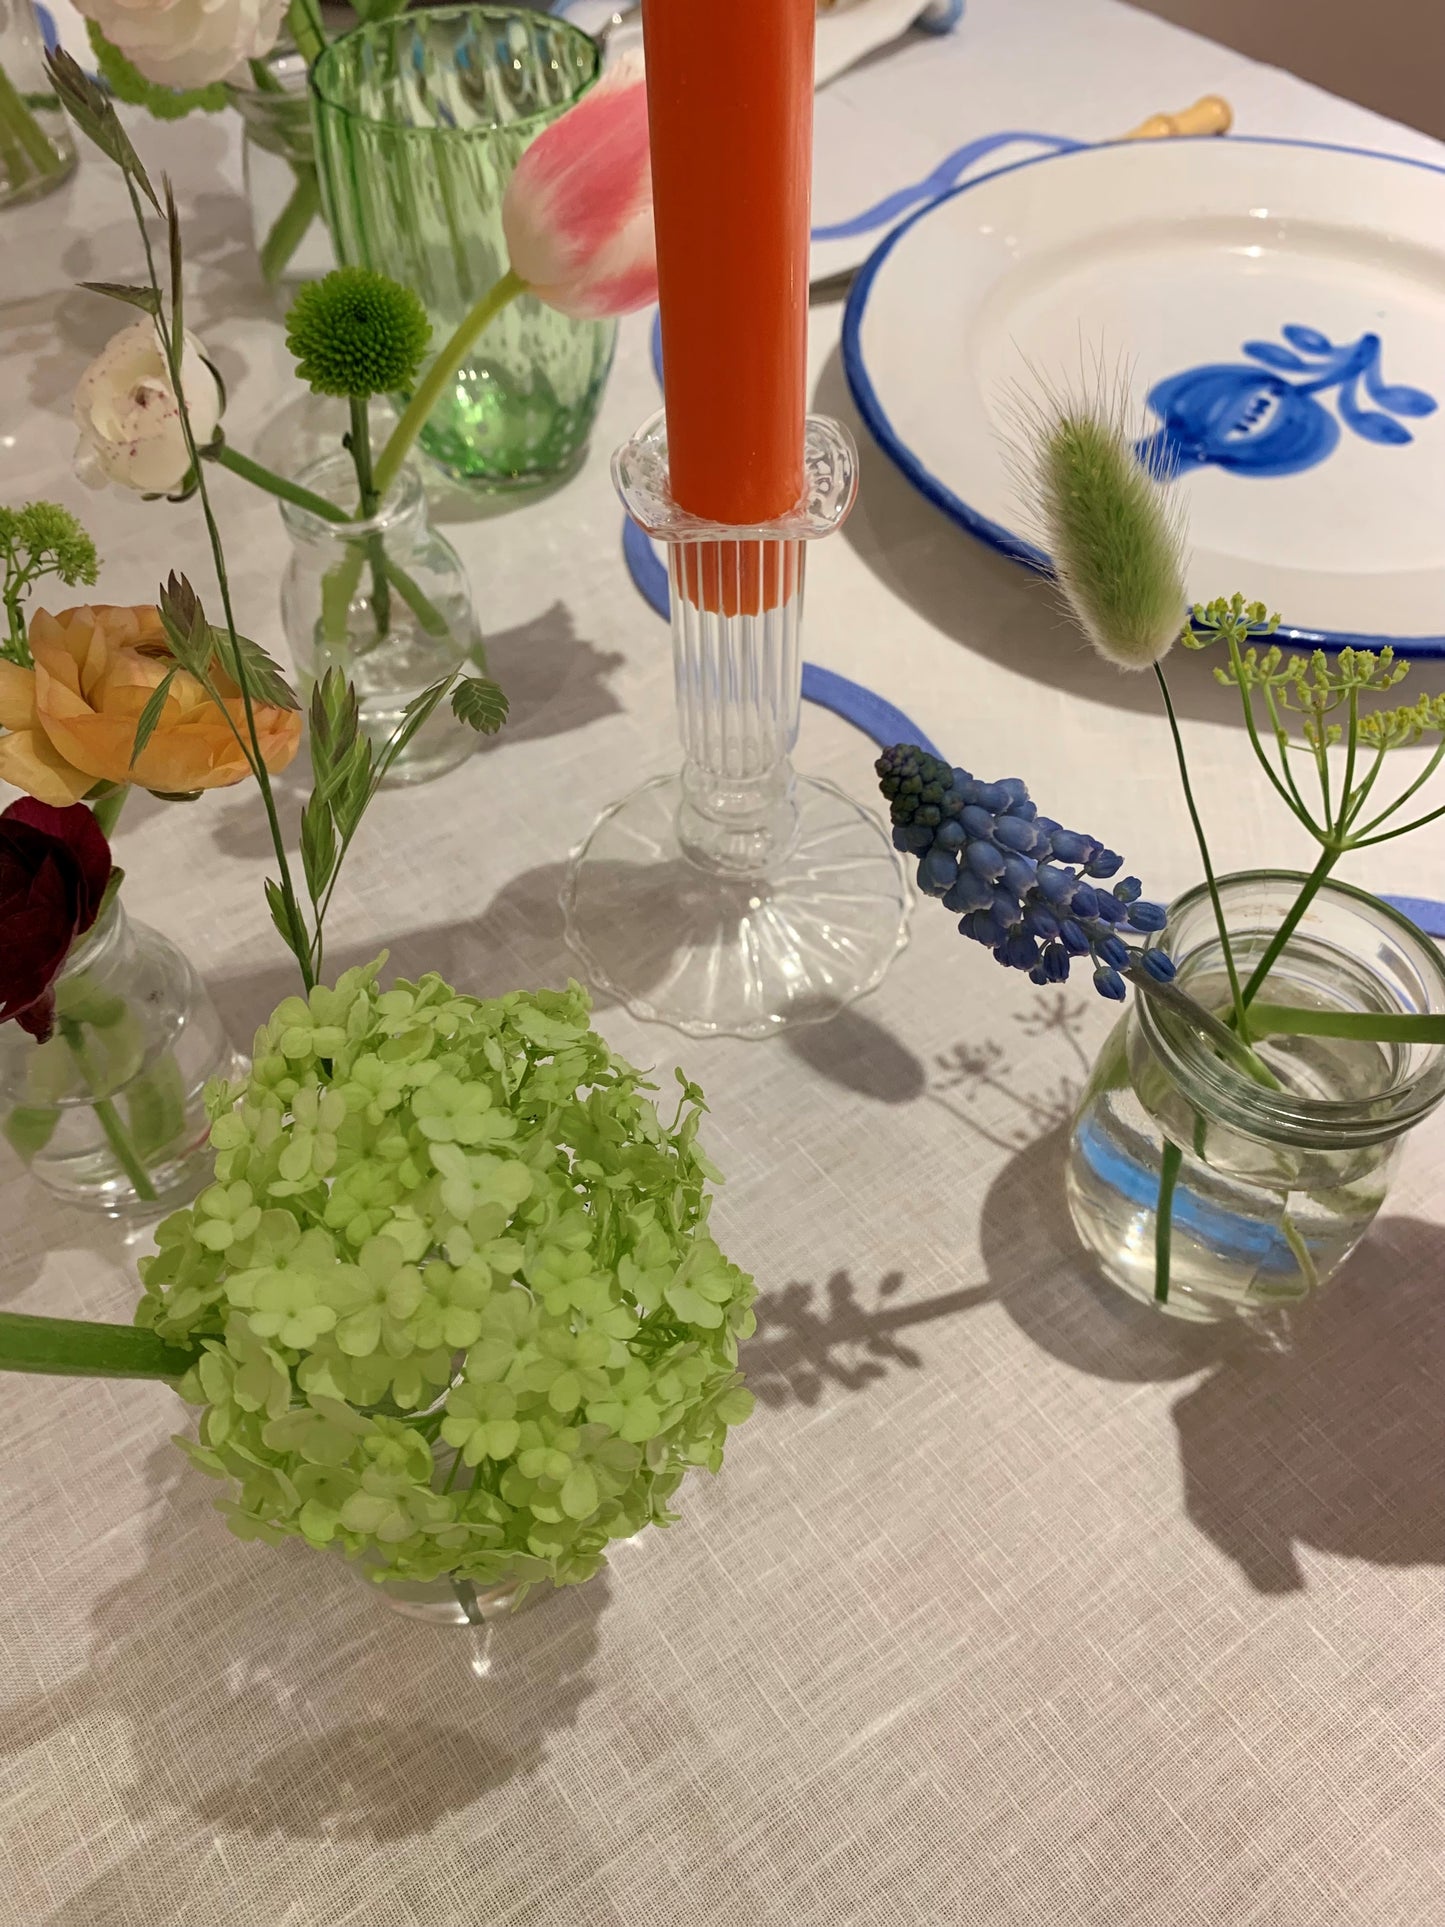 A picture of a laid table with flowers and an orange candle in a short glass candel holder.